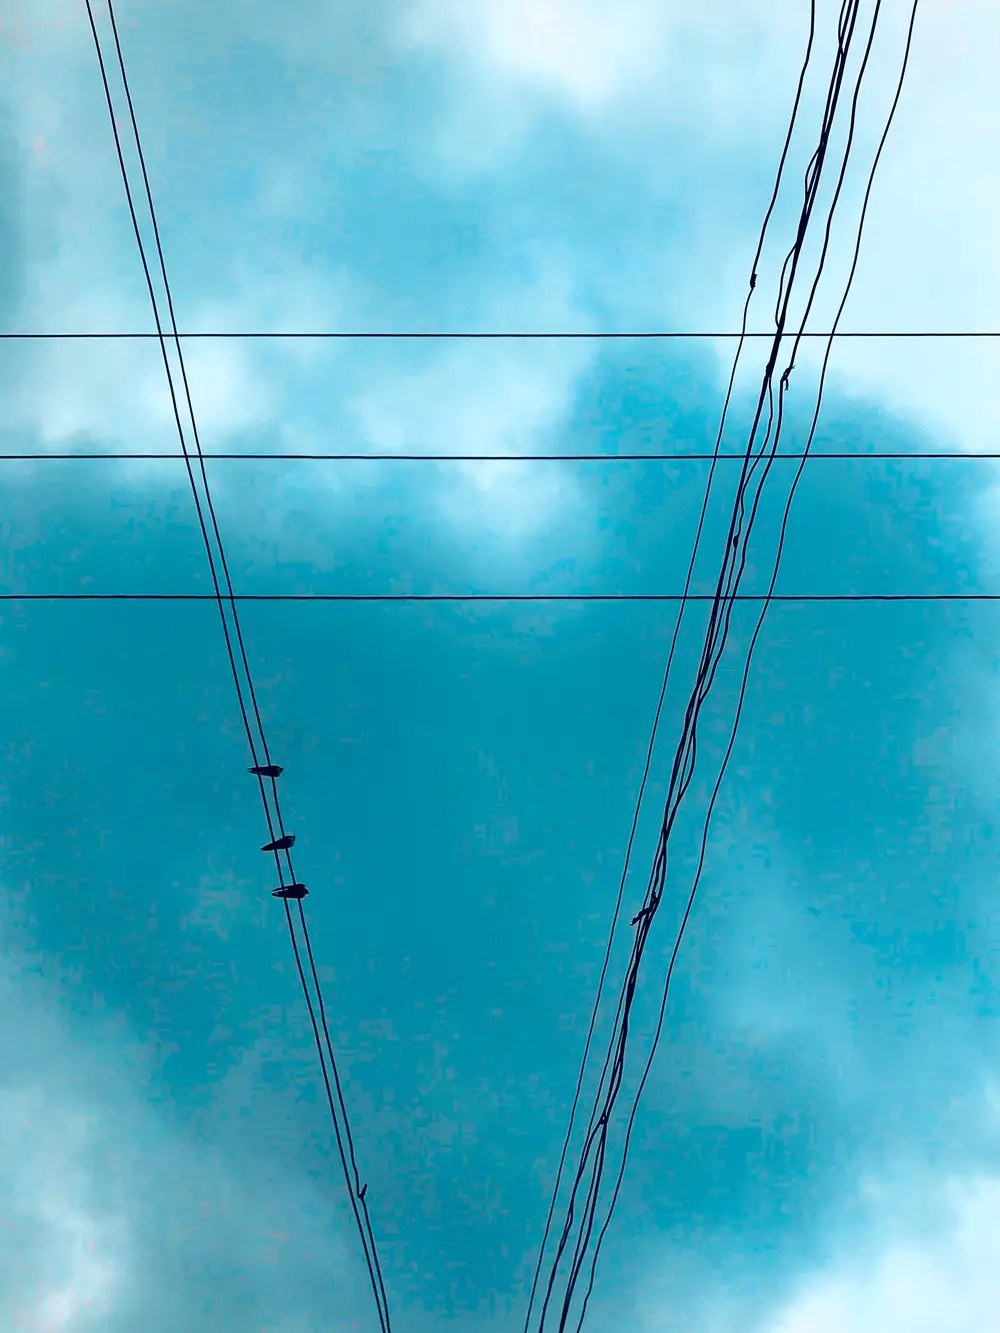 Two lines of wires